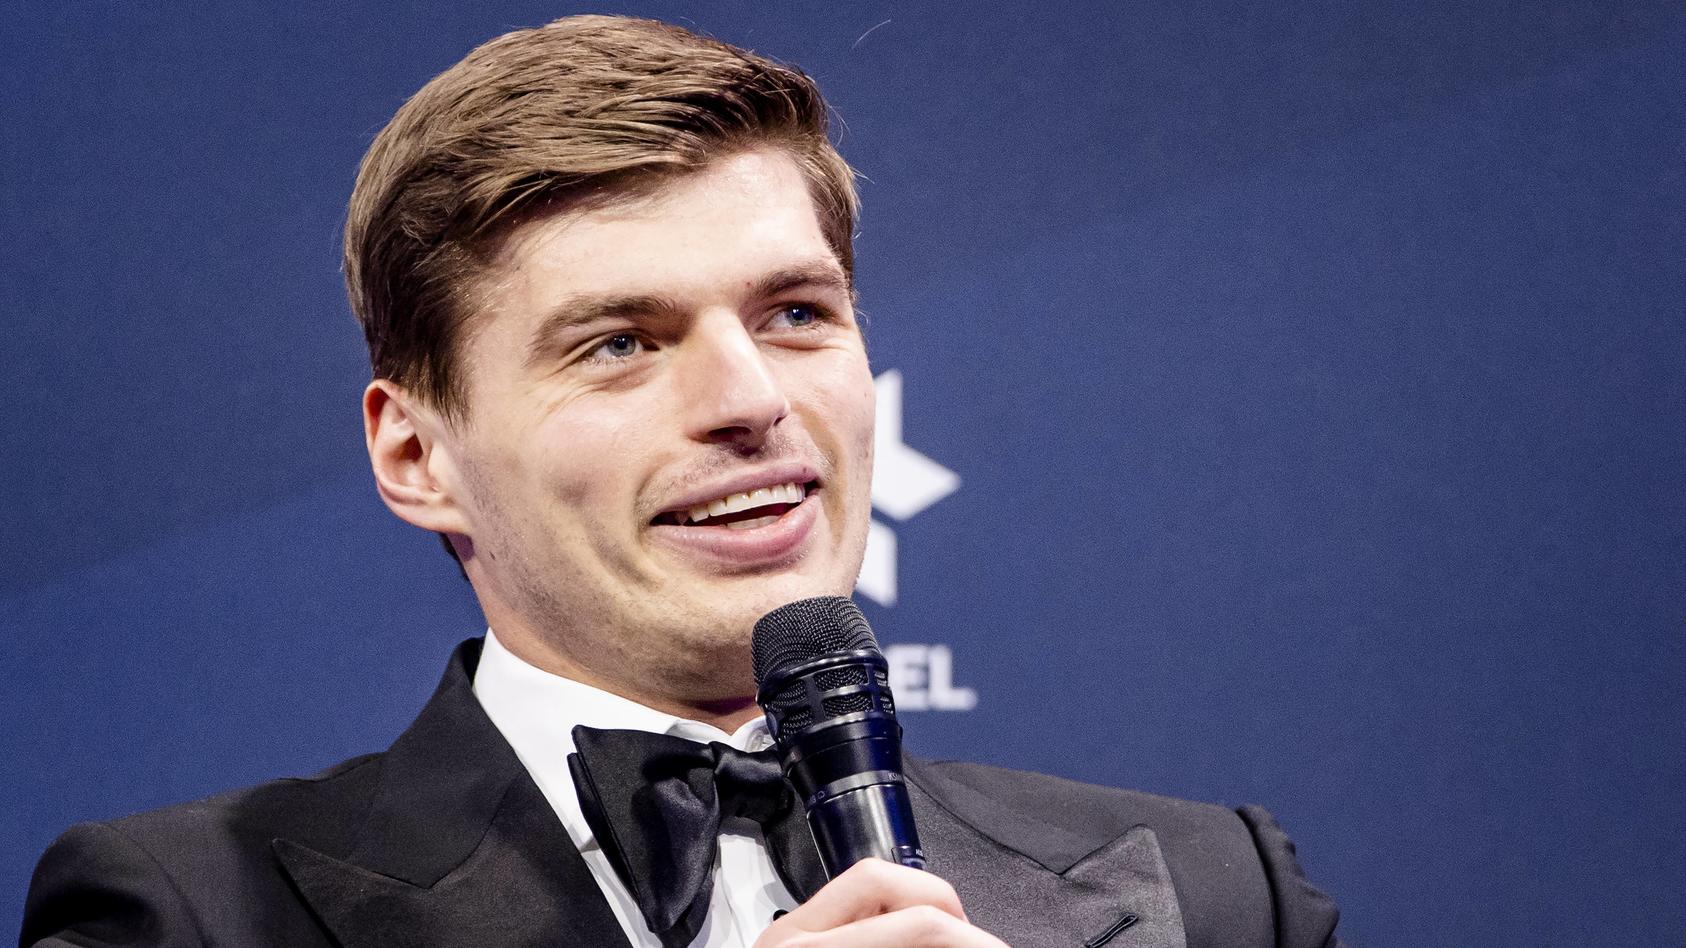  PARIS - Max Verstappen during the press conference, PK, Pressekonferenz at the FIA Price Giving Gala, where he will be awarded the World Cup. Verstappen is the first Dutch Formula 1 world champion ever. ANP SEM VAN DER WAL xVIxANPxSportx/xxANPxIVx *